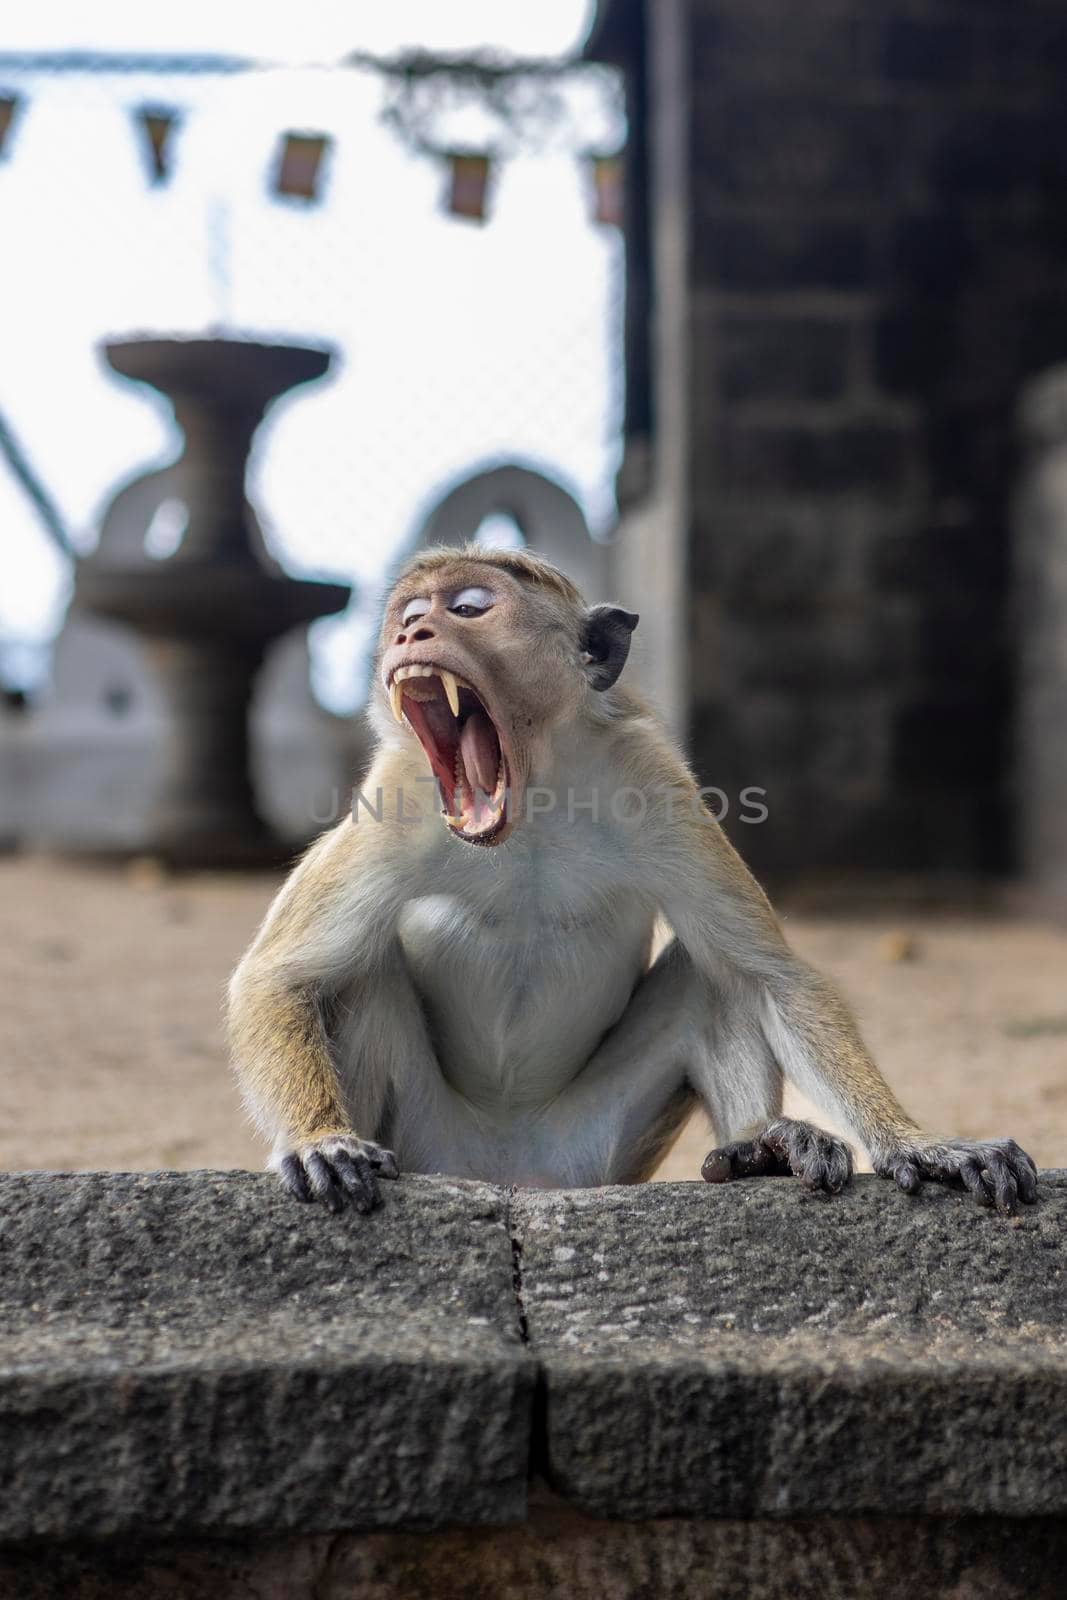 Sri Lanka. A cute monkey sits with his mouth open and shows his fangs. In an old Buddhist temple. by usphoto